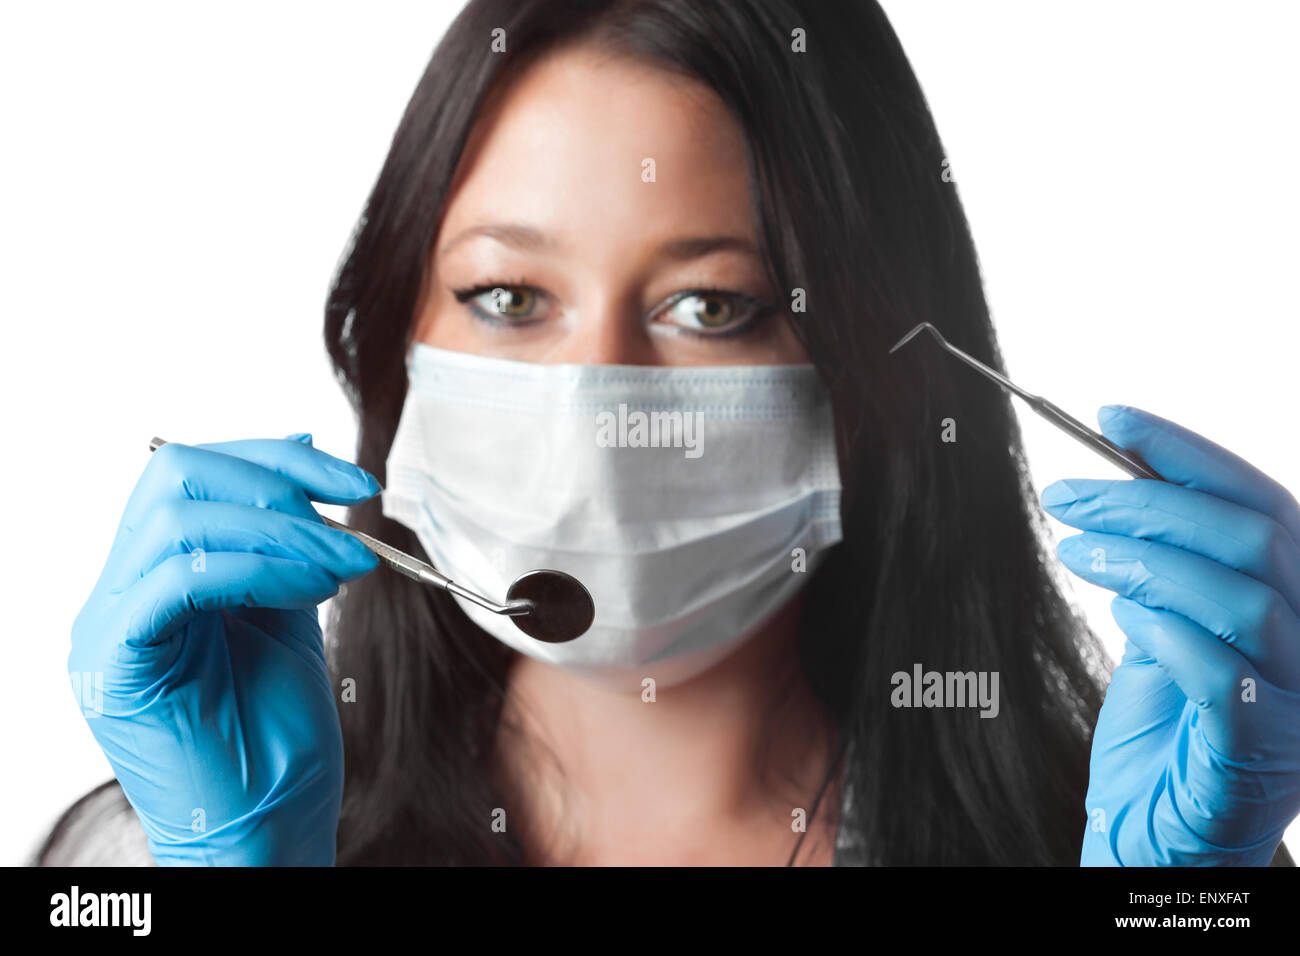 dentist in mask holding tool and mirror isolated Stock Photo